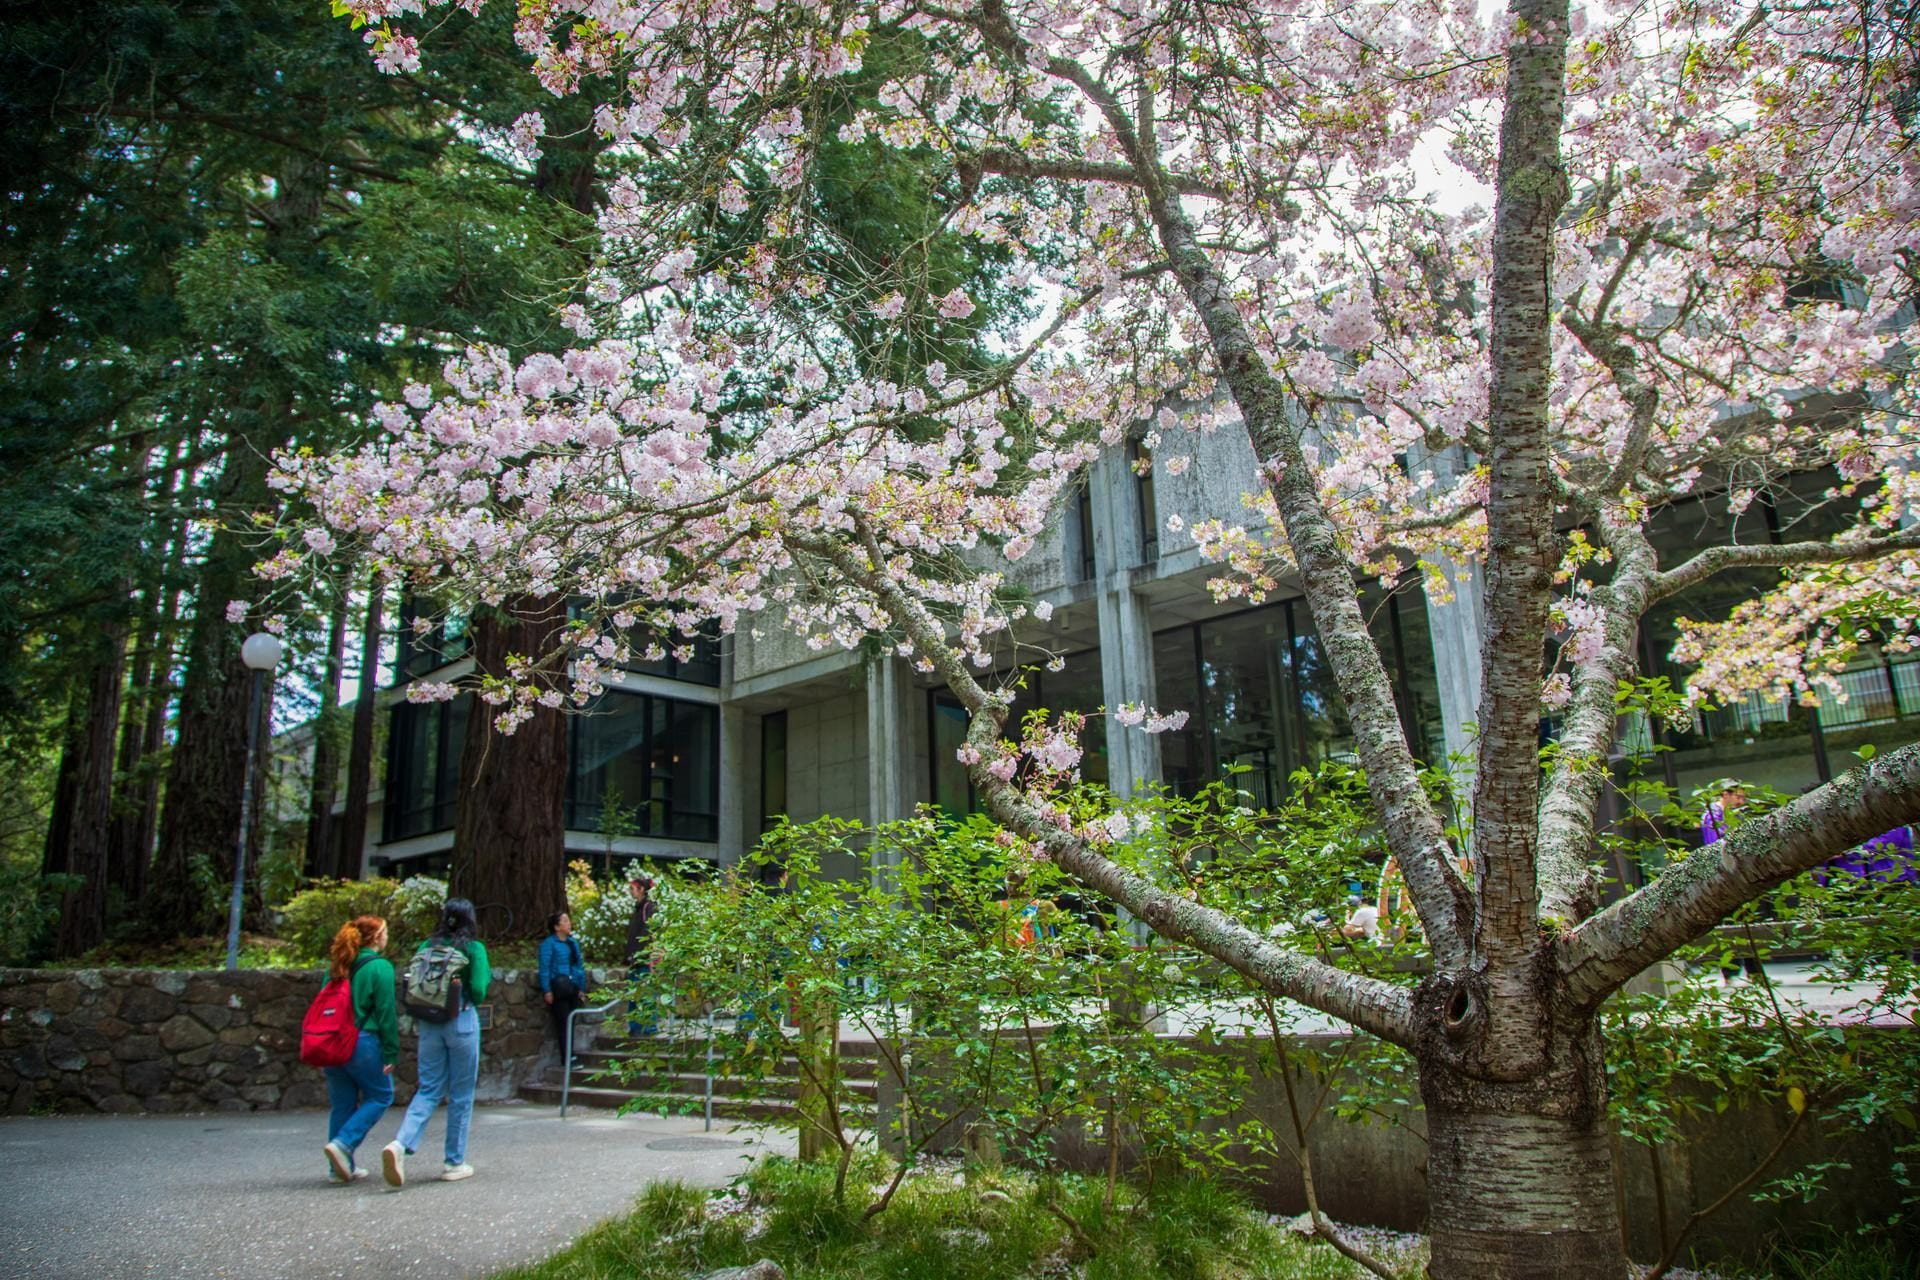 UCSC library with a blossoming cherry tree in the foreground and students in the background.